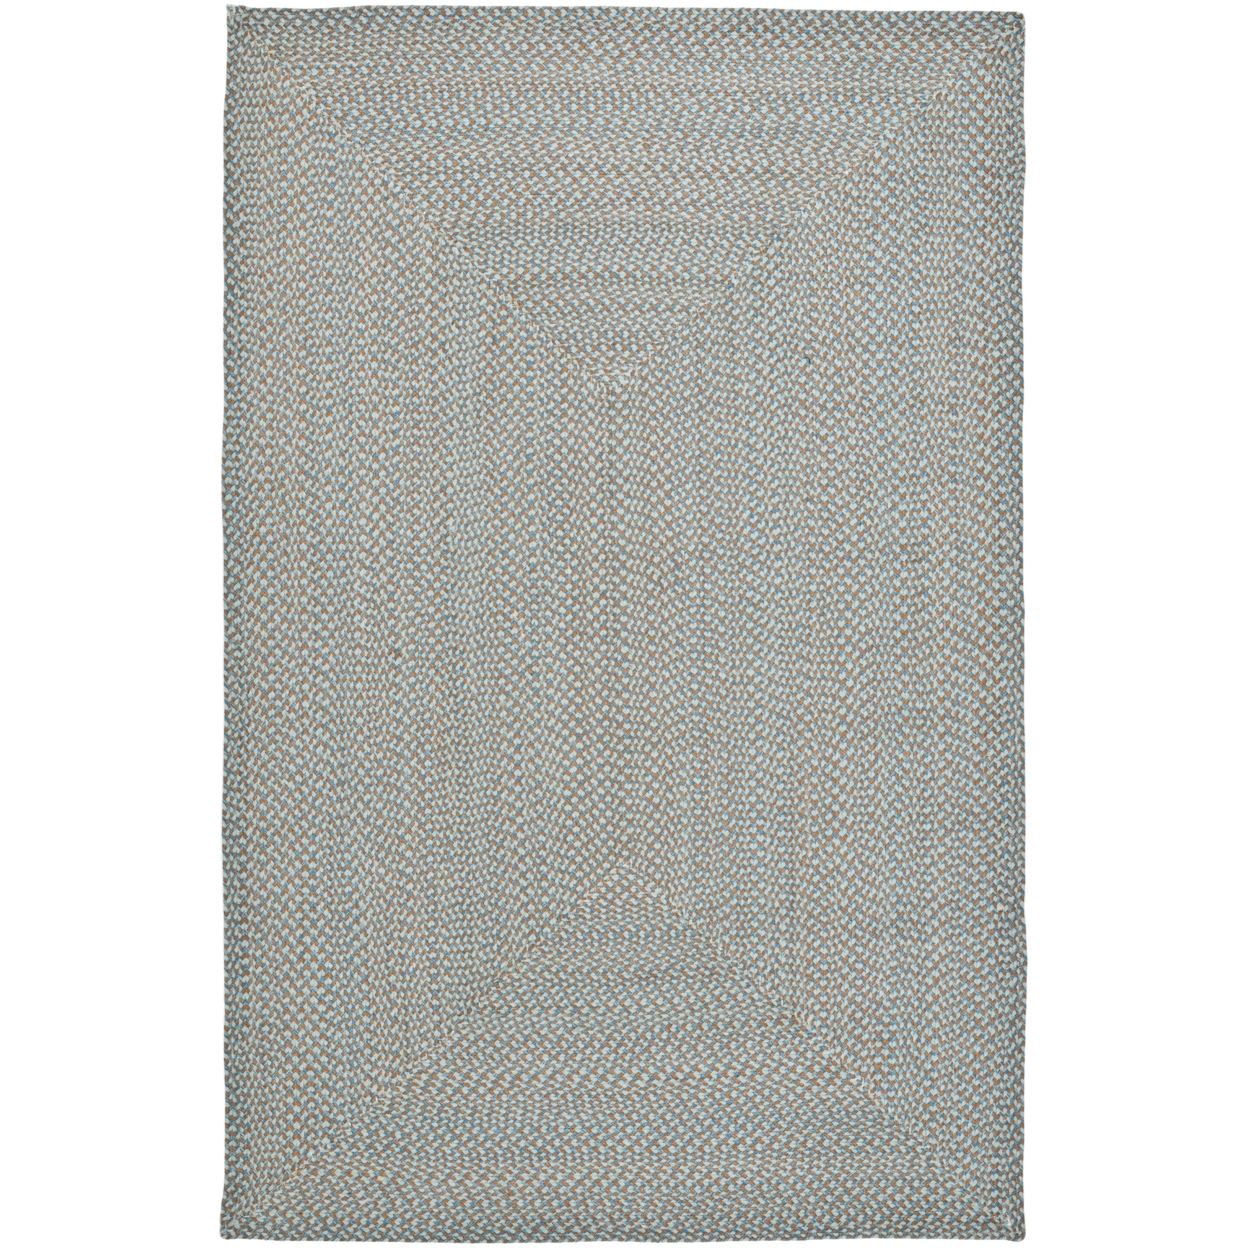 SAFAVIEH Braided Collection BRD170A Handwoven Multi Rug - 8' X 10' Oval